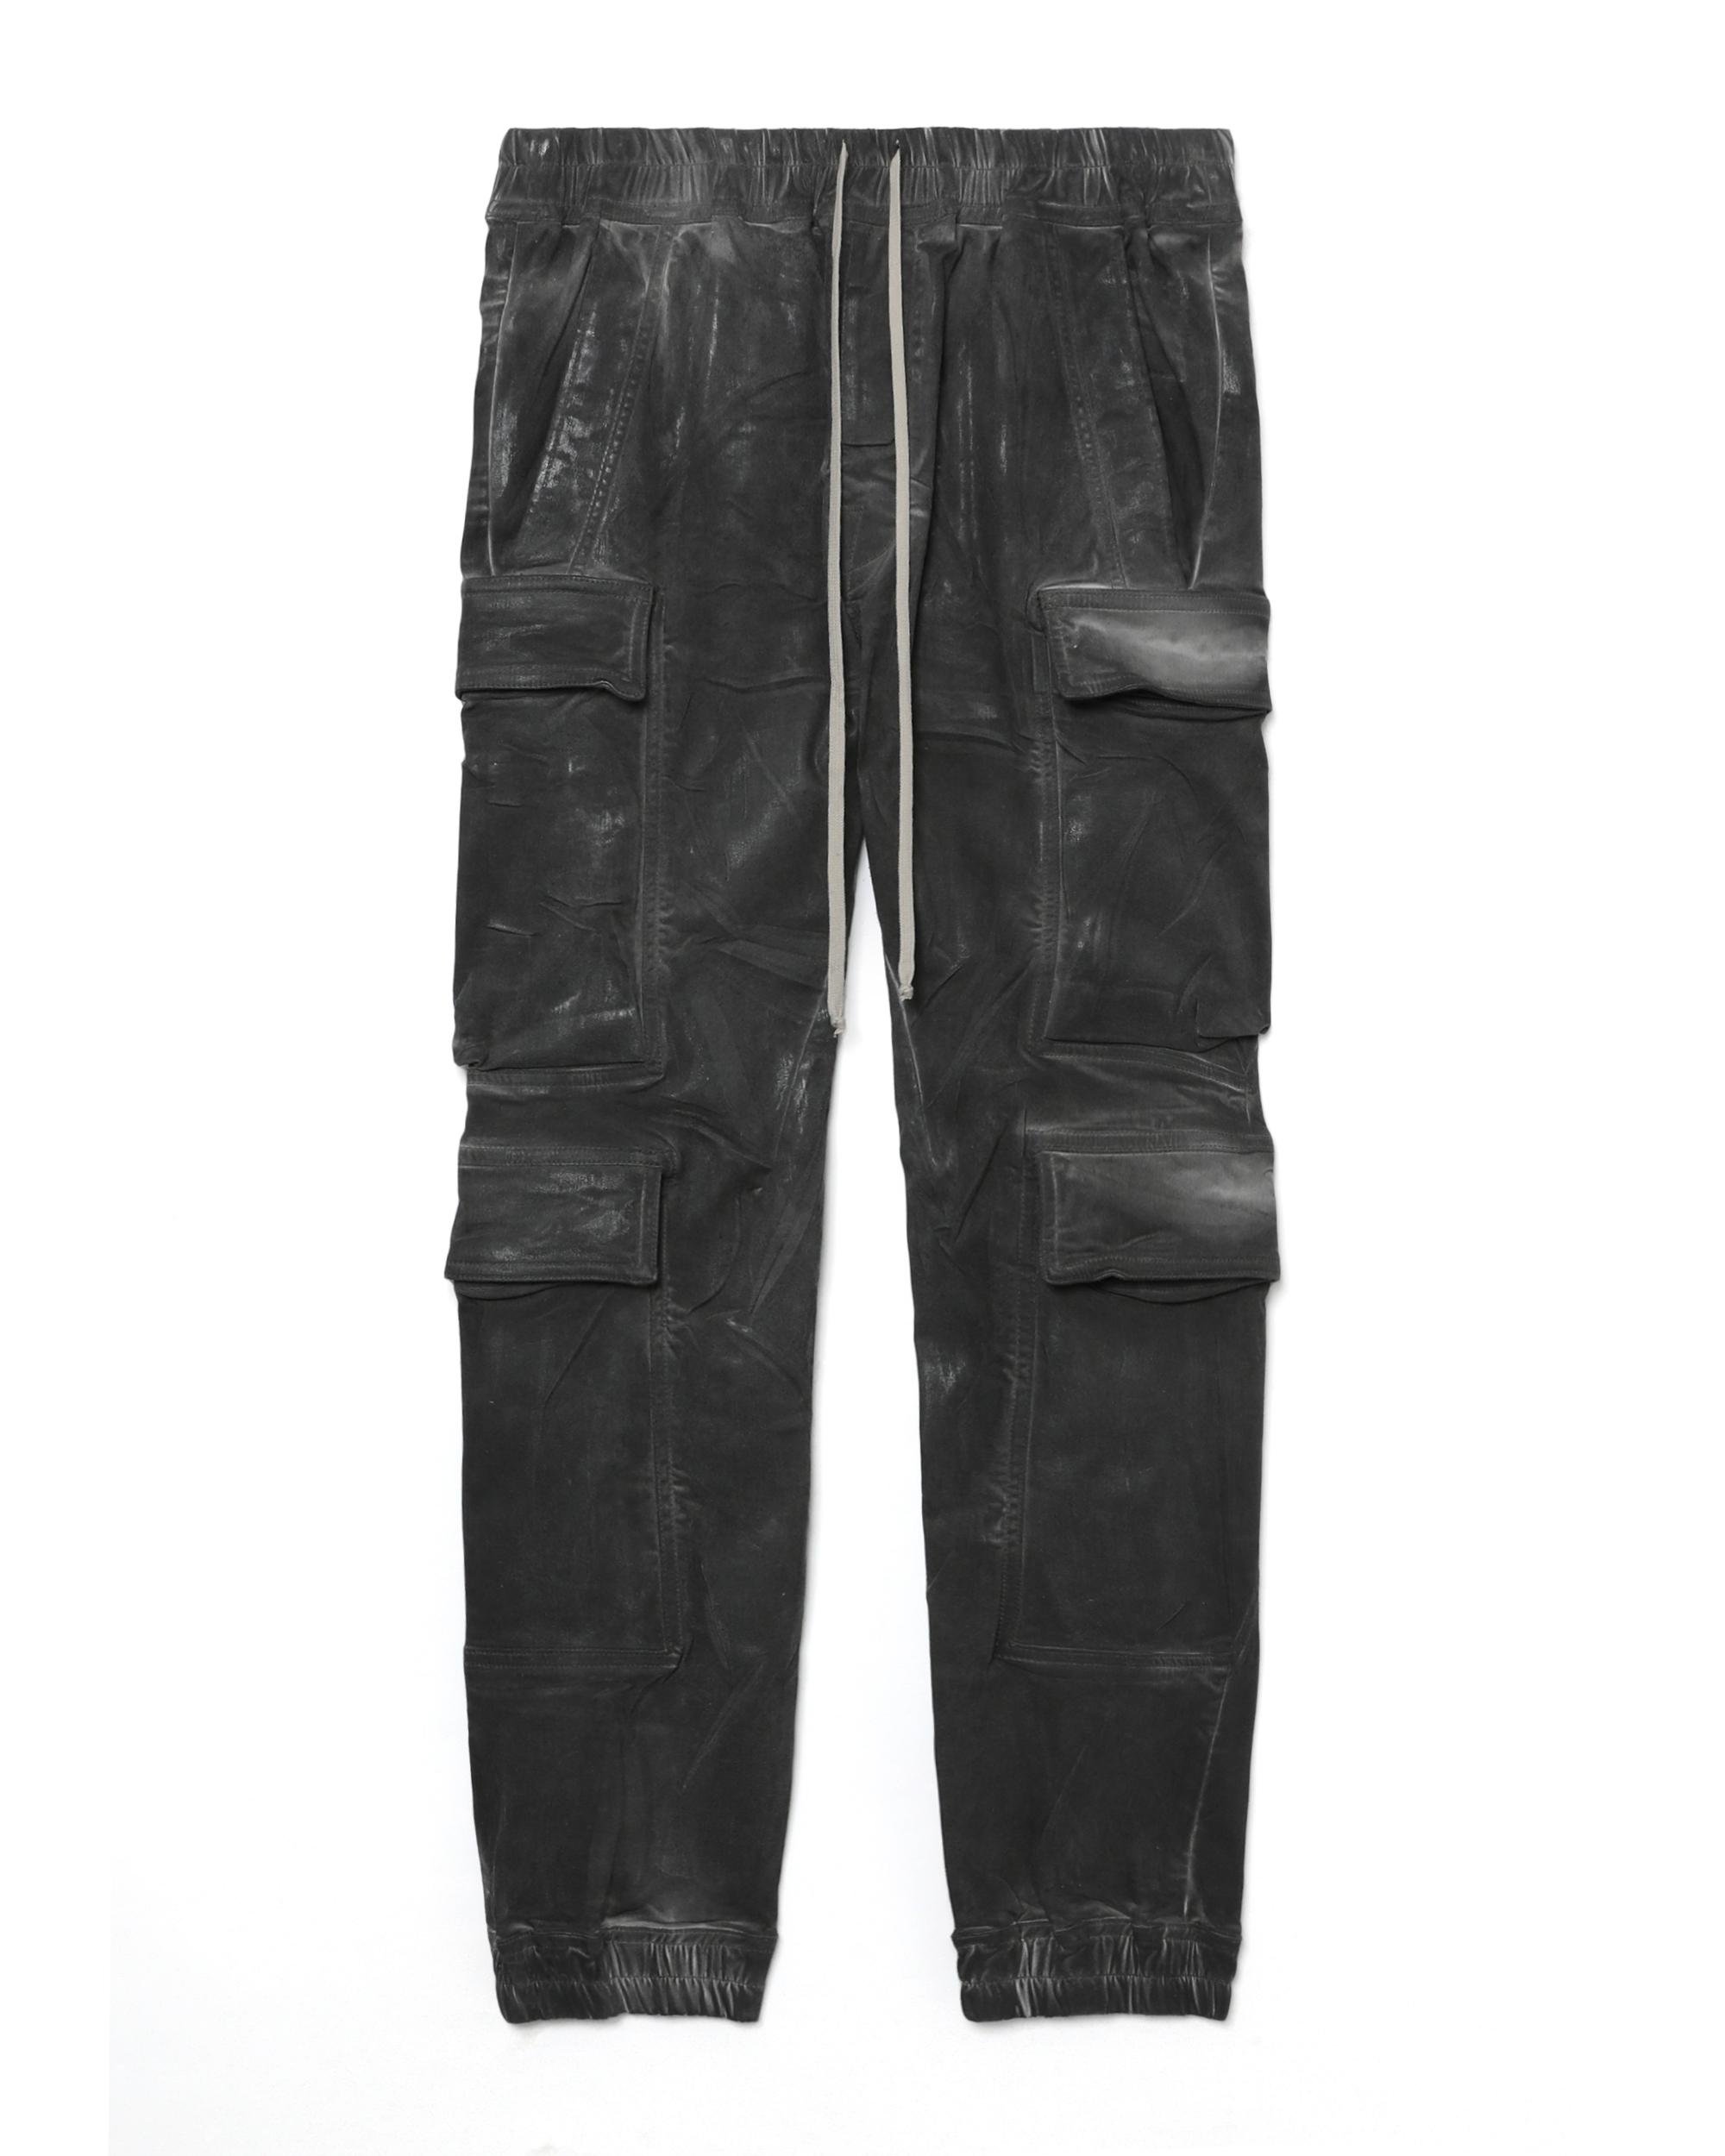 Cargo jeans by RICK OWENS DRKSHDW